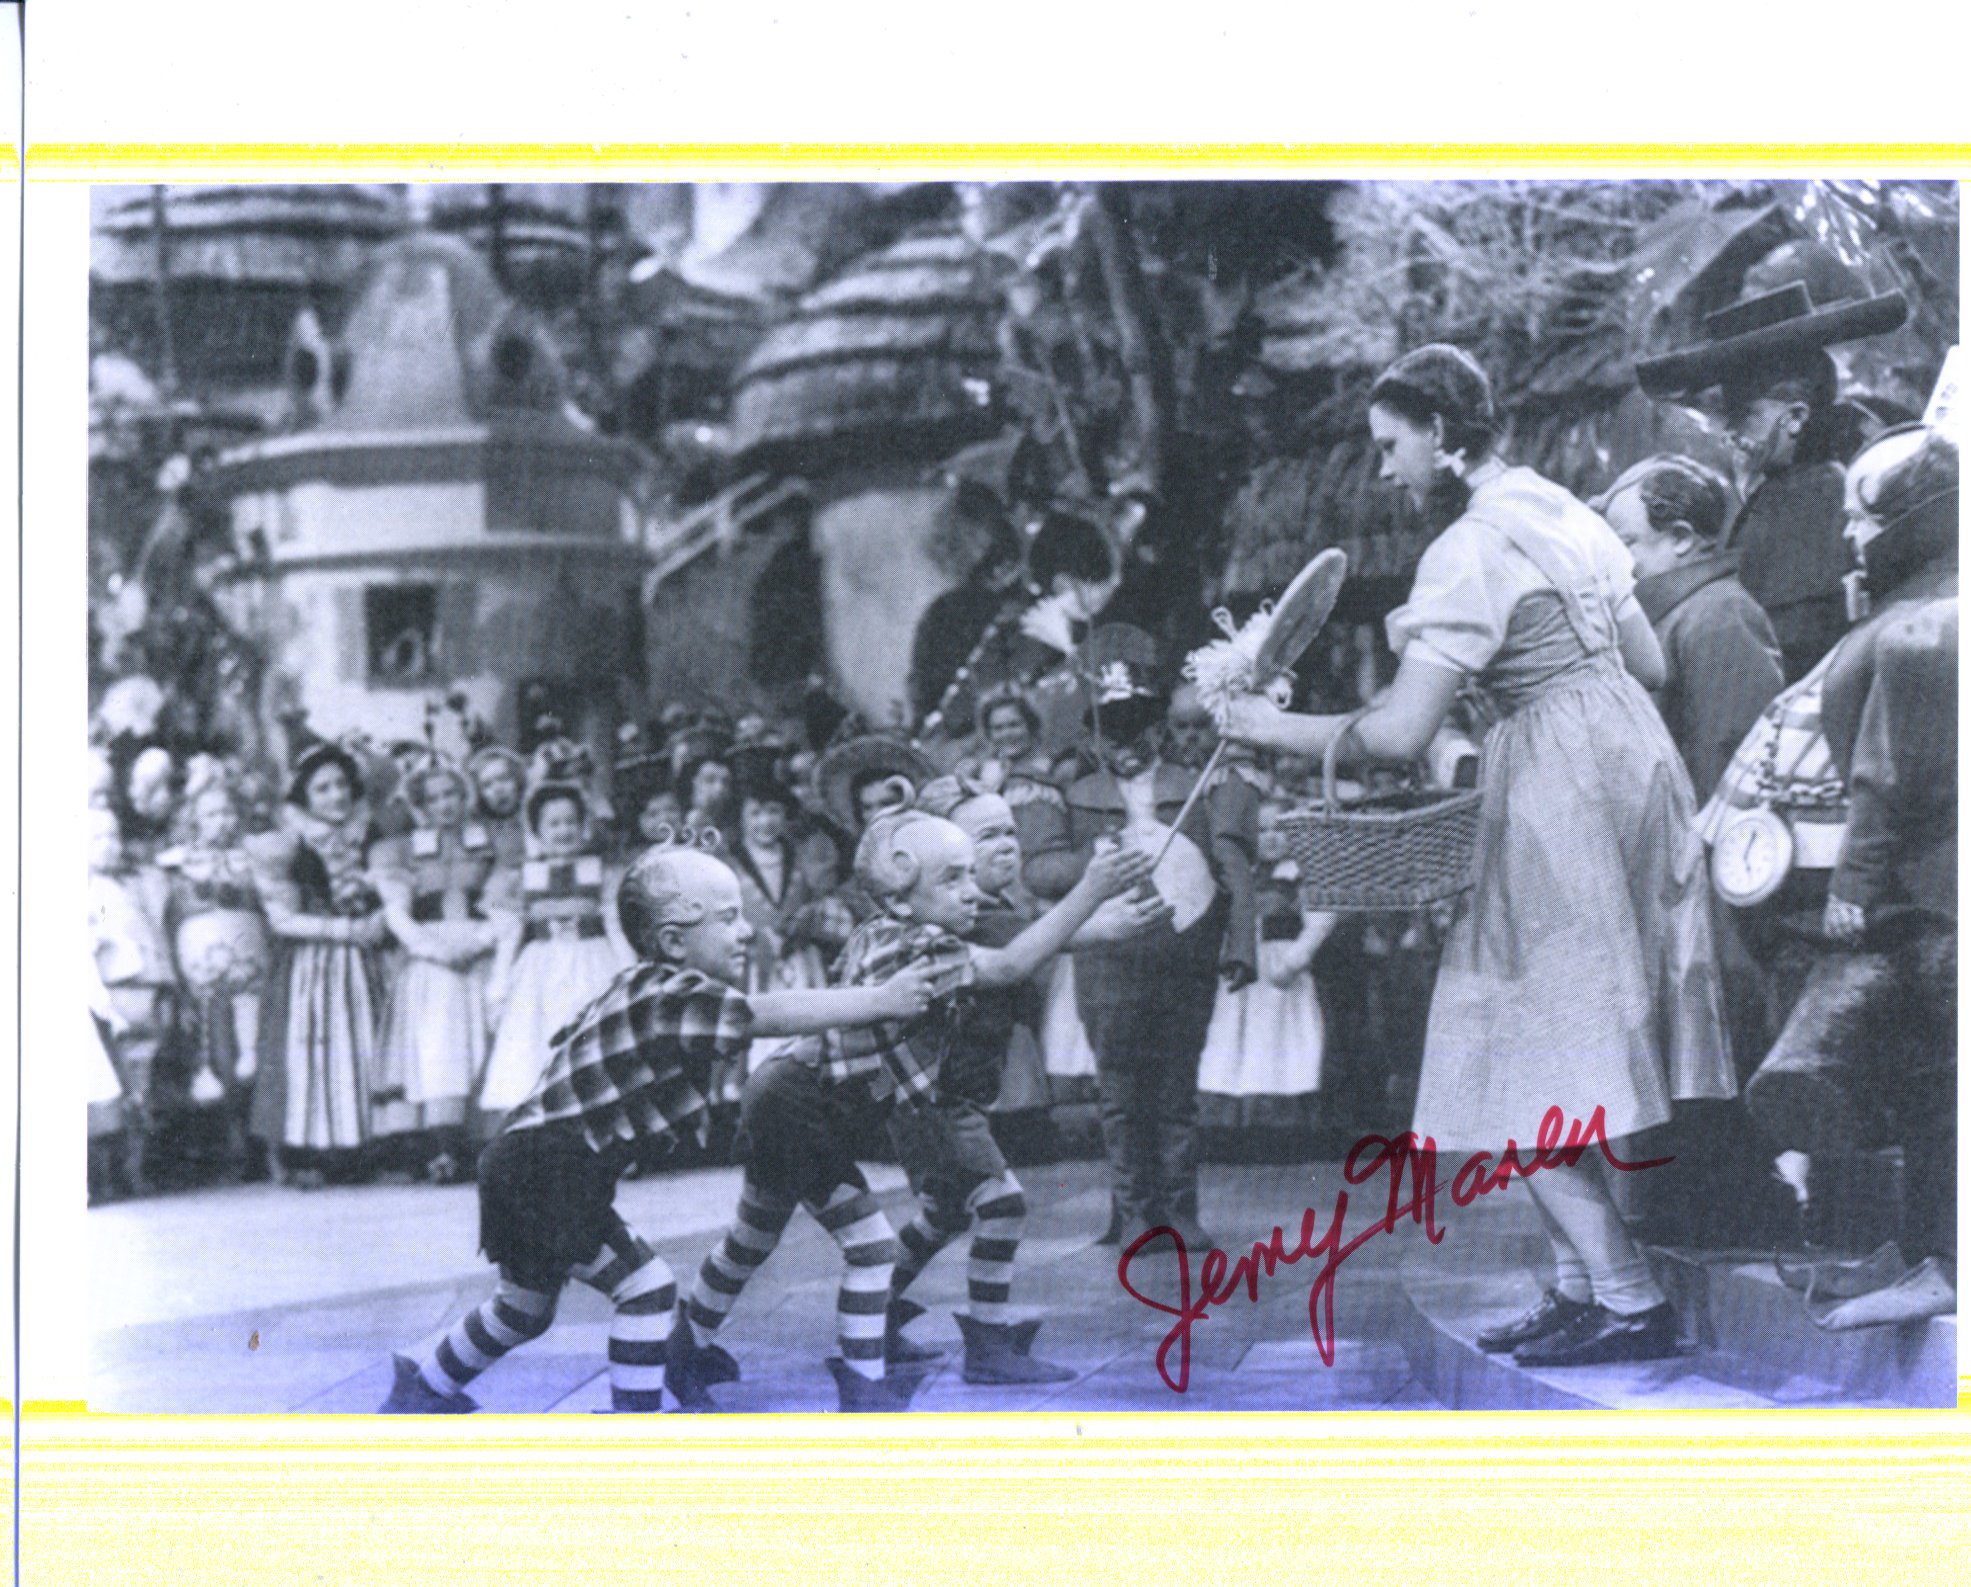 The Wizard of Oz 8x10 movie scene photo signed by Munchkin actor Jerry Maren (The Lollipop kid).